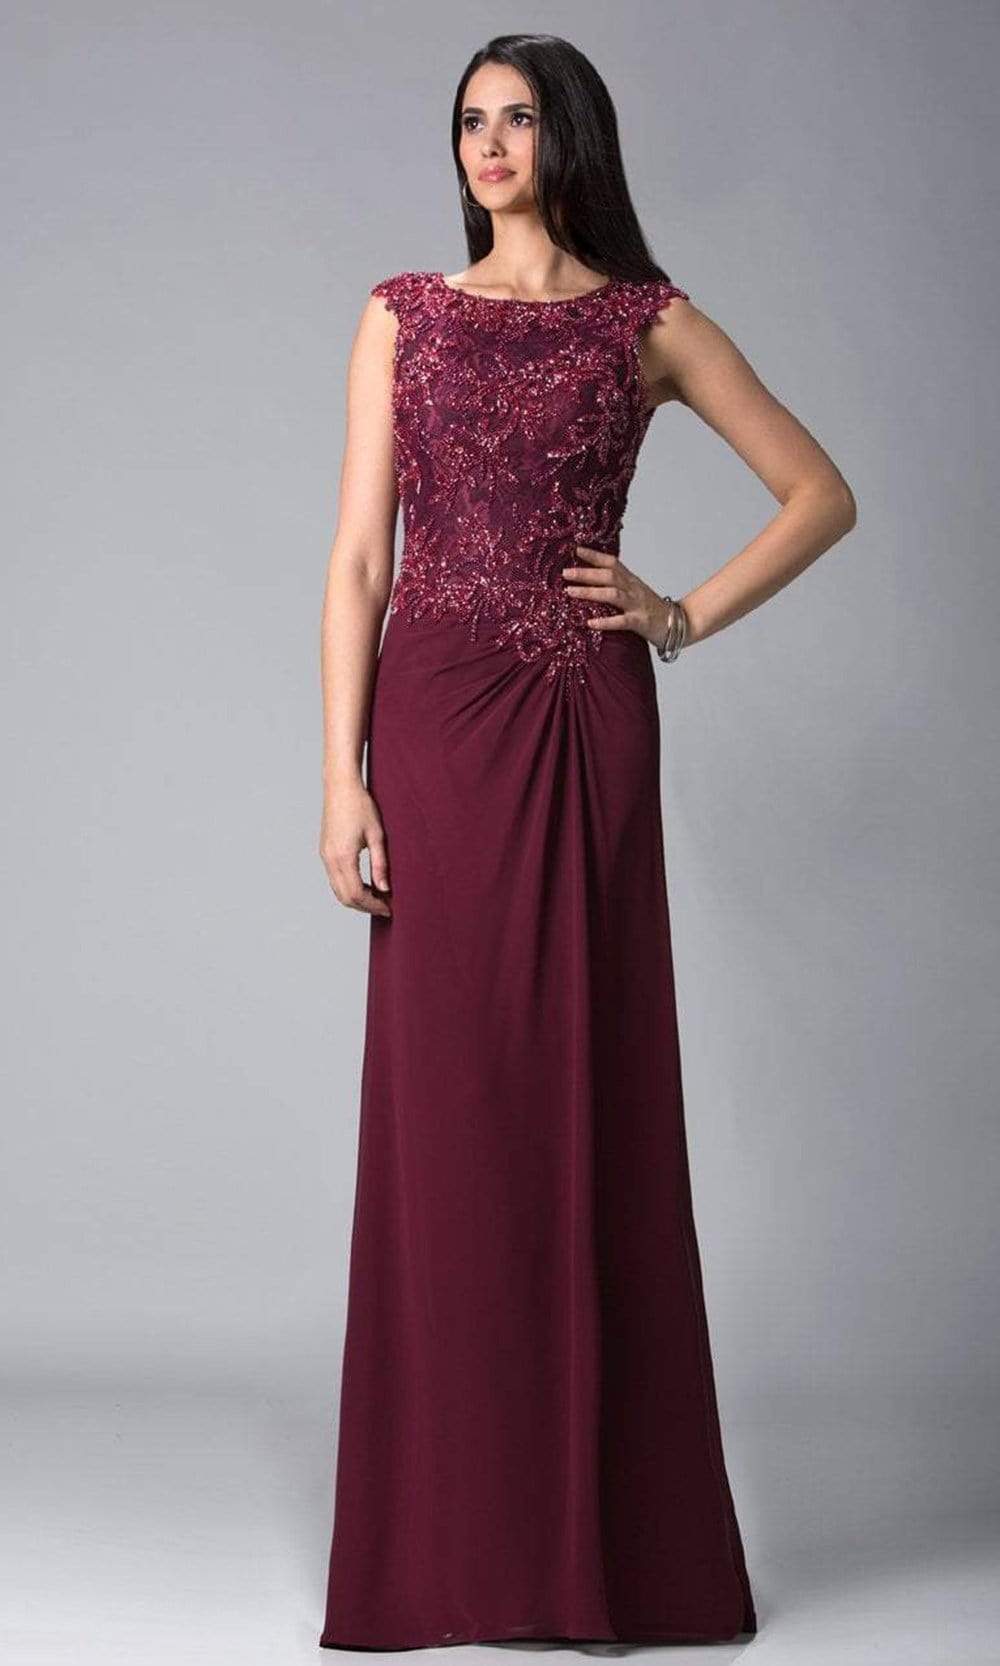 Embellished Column Gown - 100% Exclusive